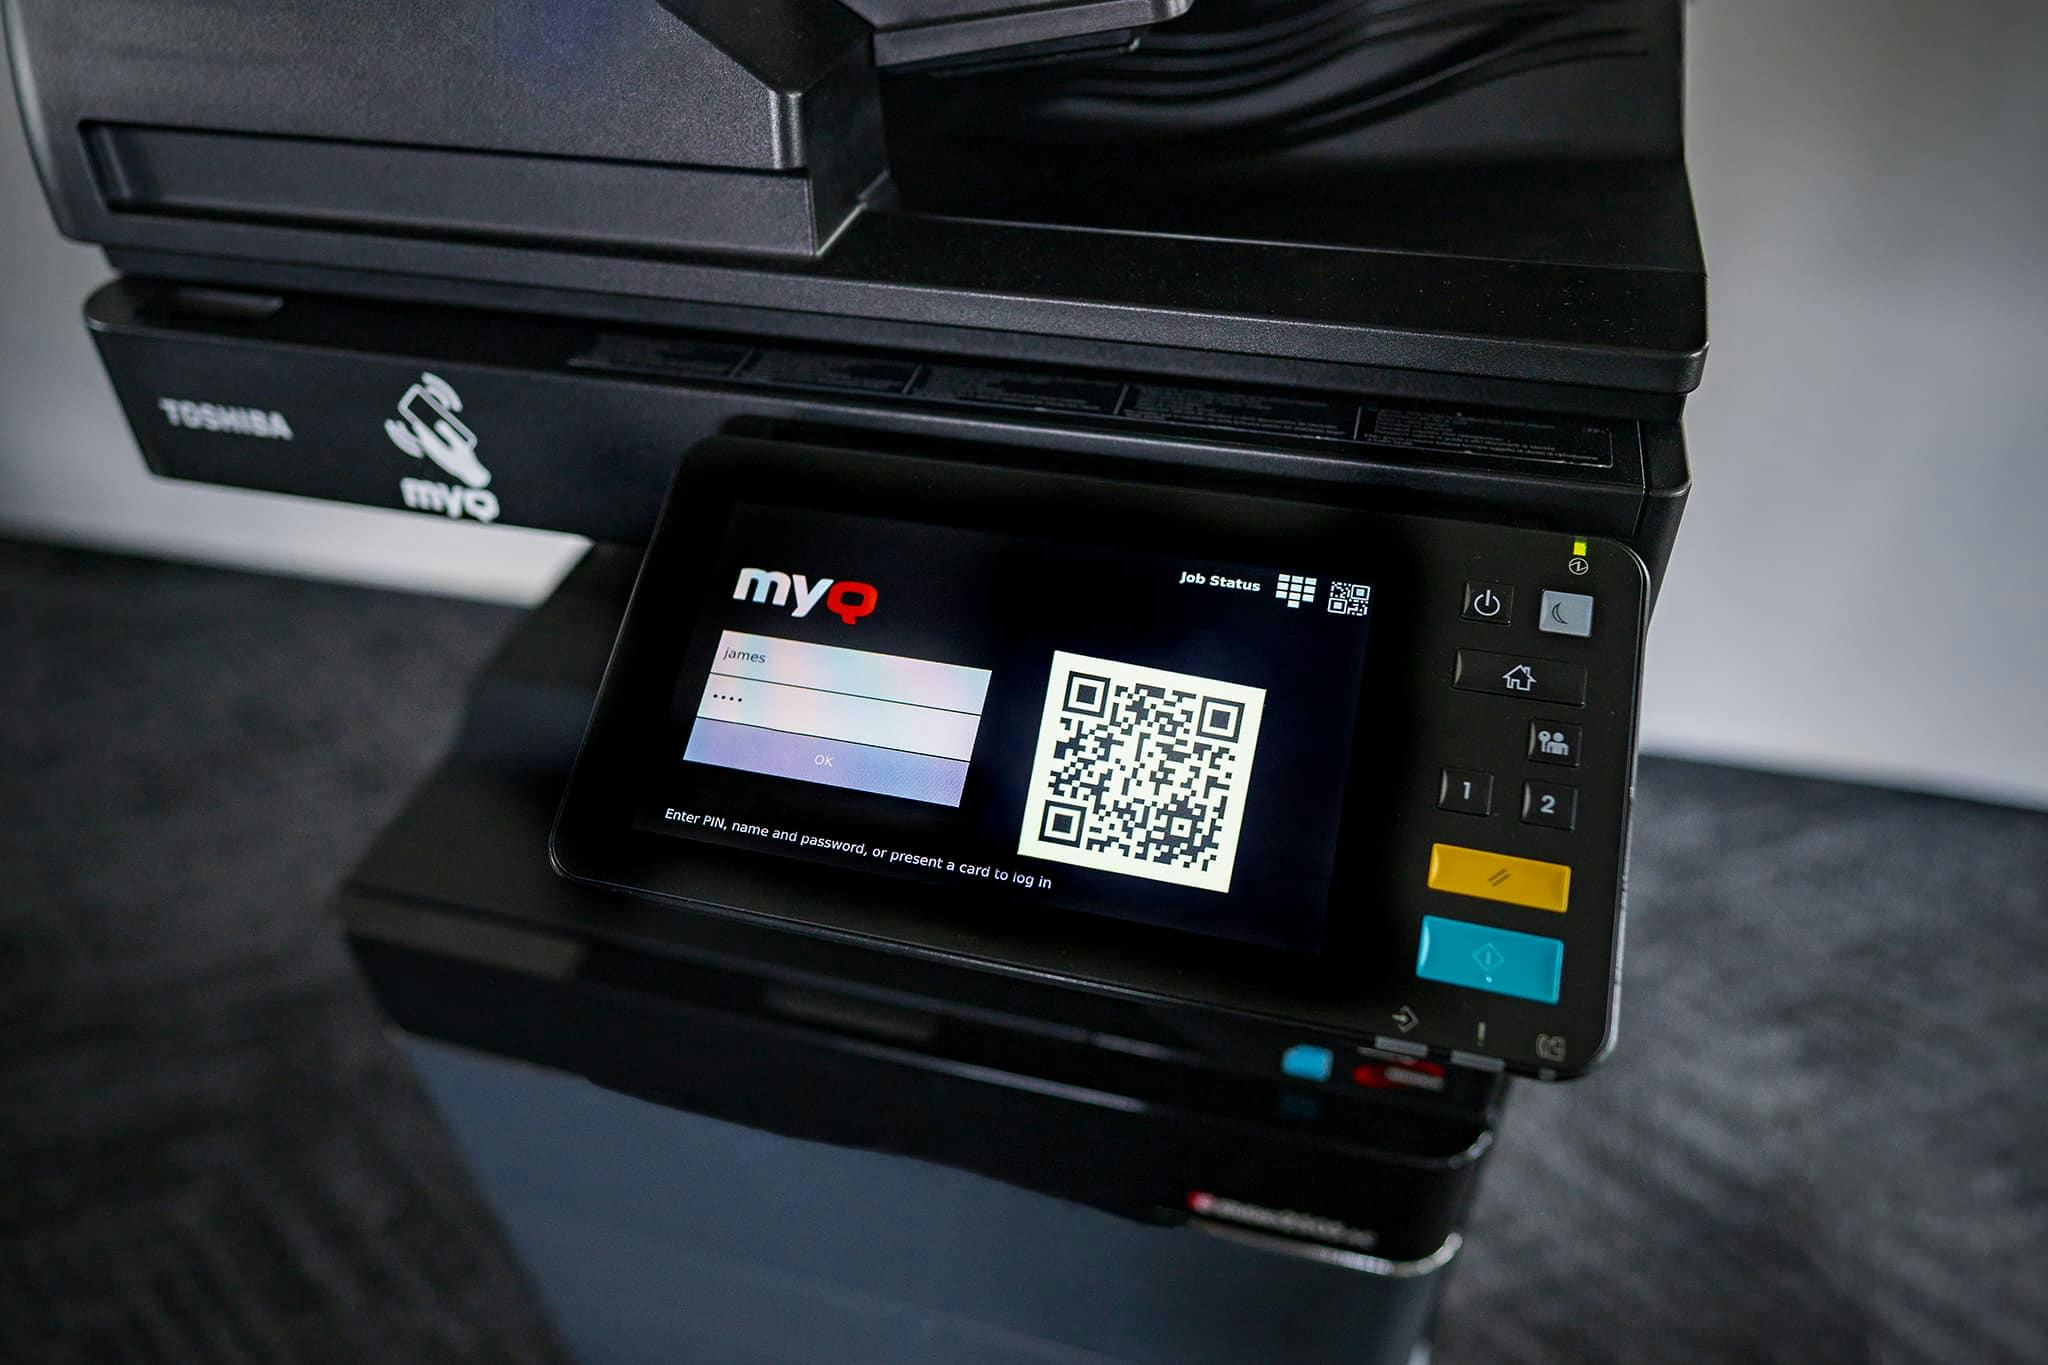 MyQ X Software - To log in, users can authentication with an ID card, PIN, password, or via the QR code using the MyQ X mobile app.The dynamic QR code enables a secure, hands-free login into the printer.